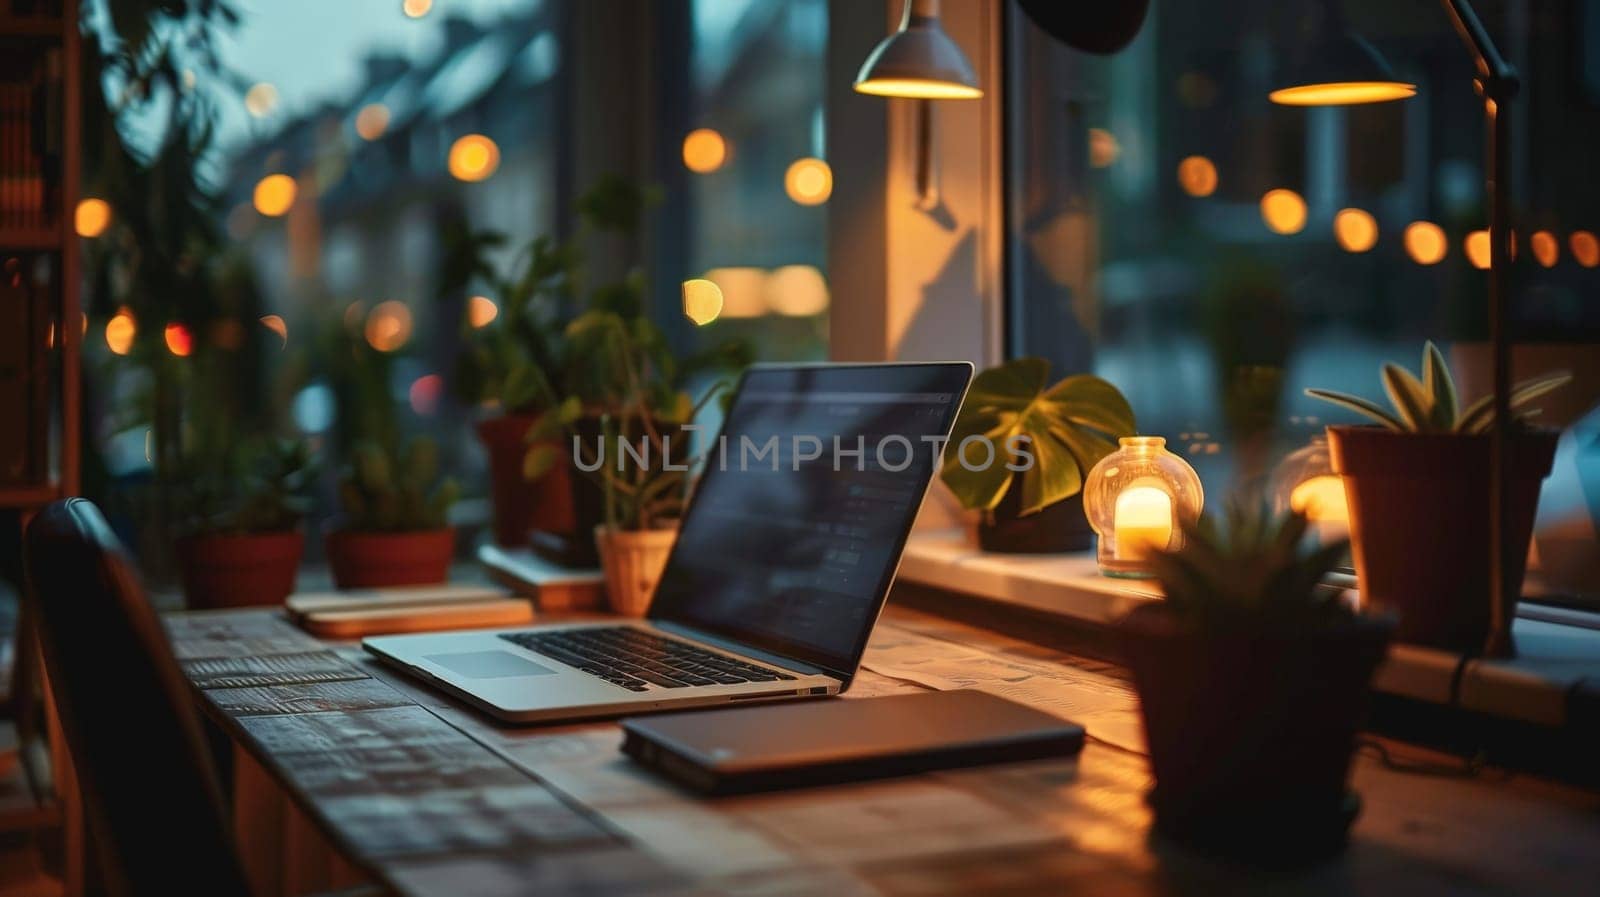 A laptop is on a desk with a potted plant and a candle. The scene is cozy and inviting, with the warm glow of the candle and the greenery of the plant creating a relaxing atmosphere